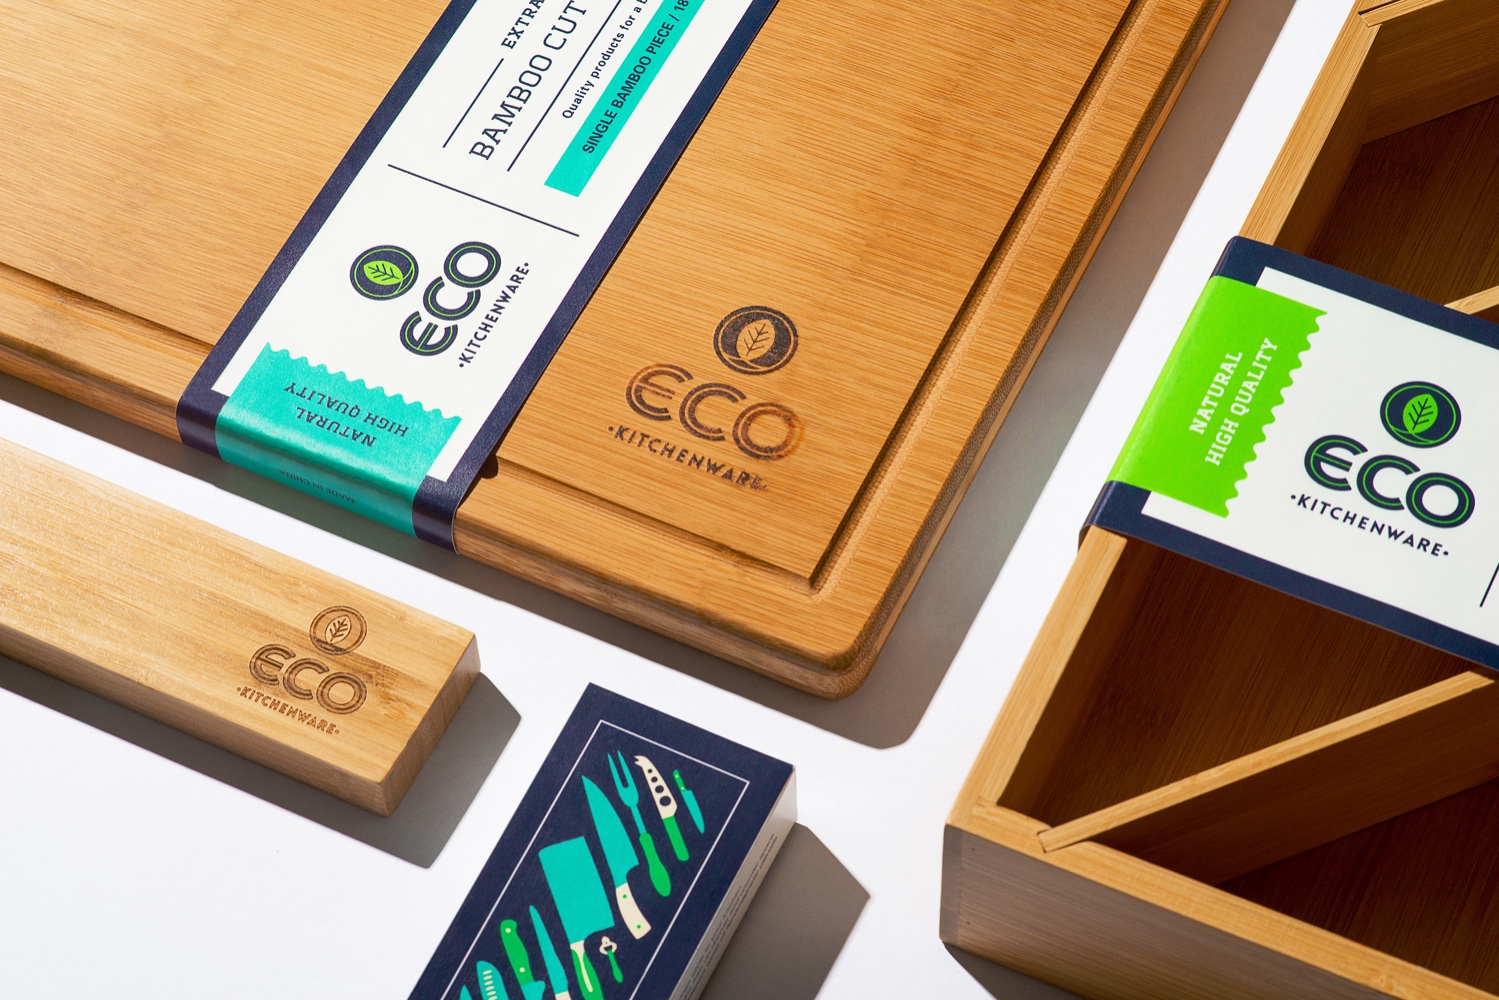 Eco Kitchenware Thinks You Could Use A Little More Bamboo In Your Meal Prep